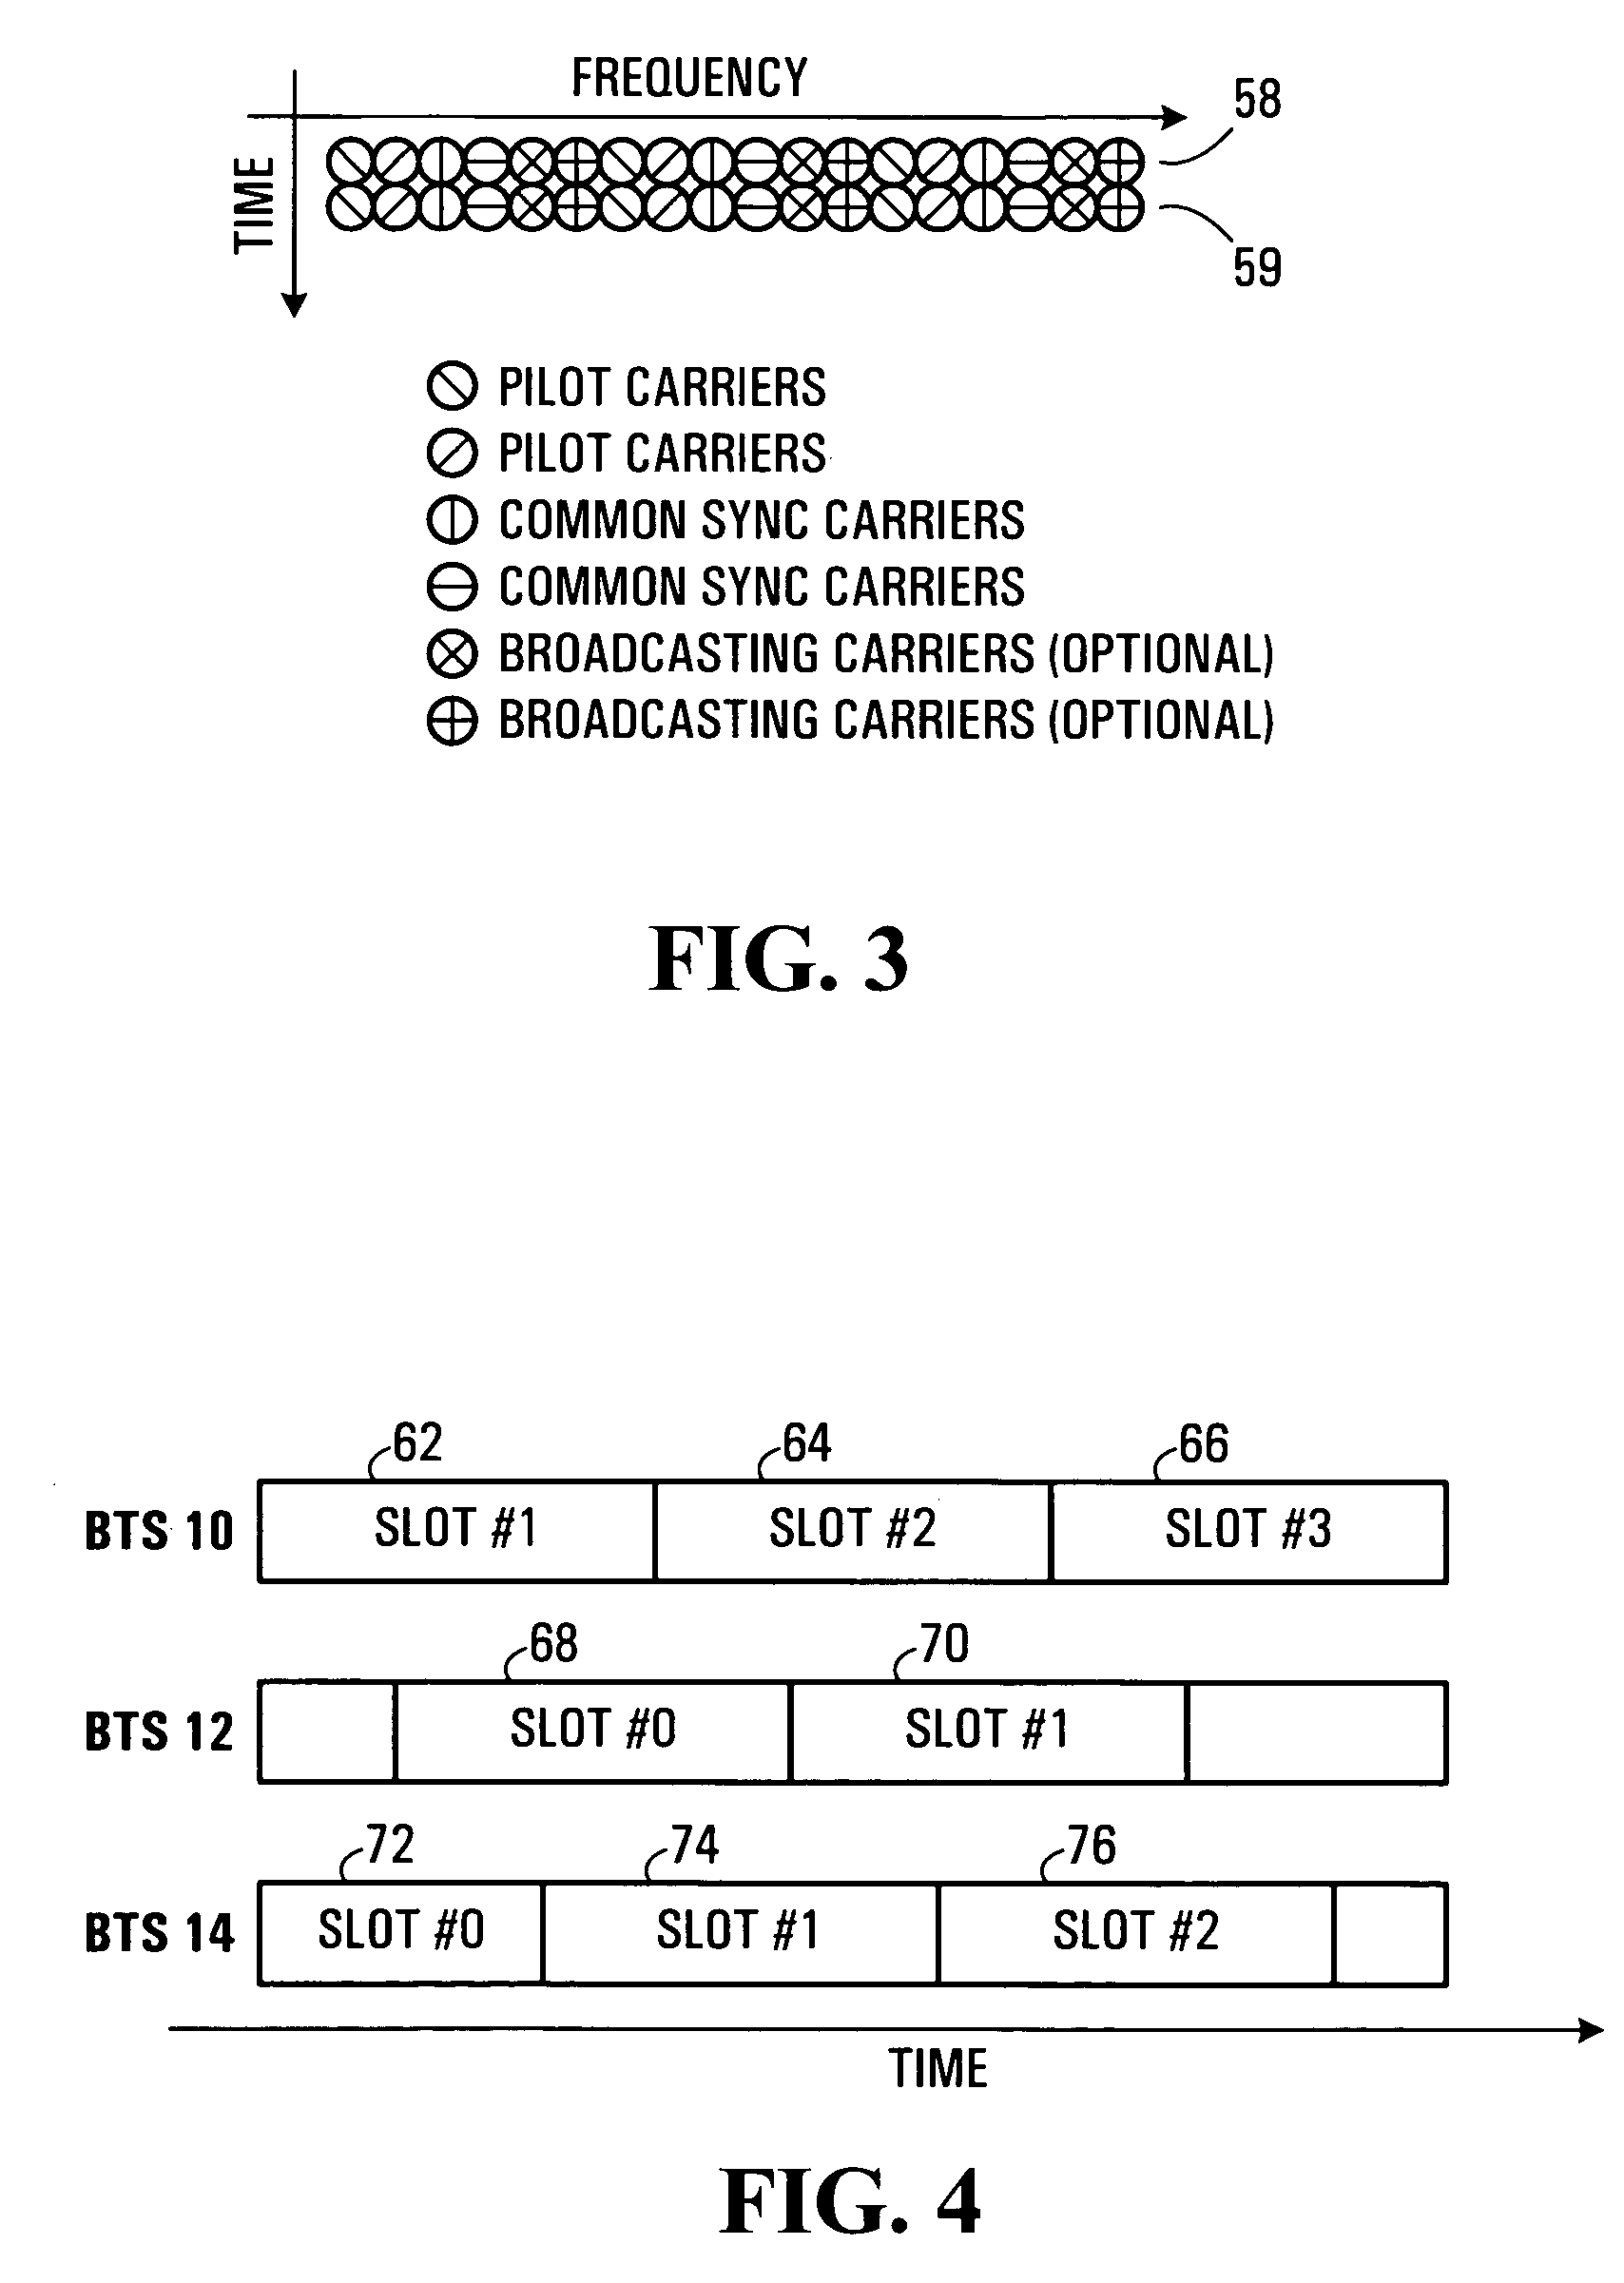 Physical layer structures and initial access schemes in an unsynchronized communication network